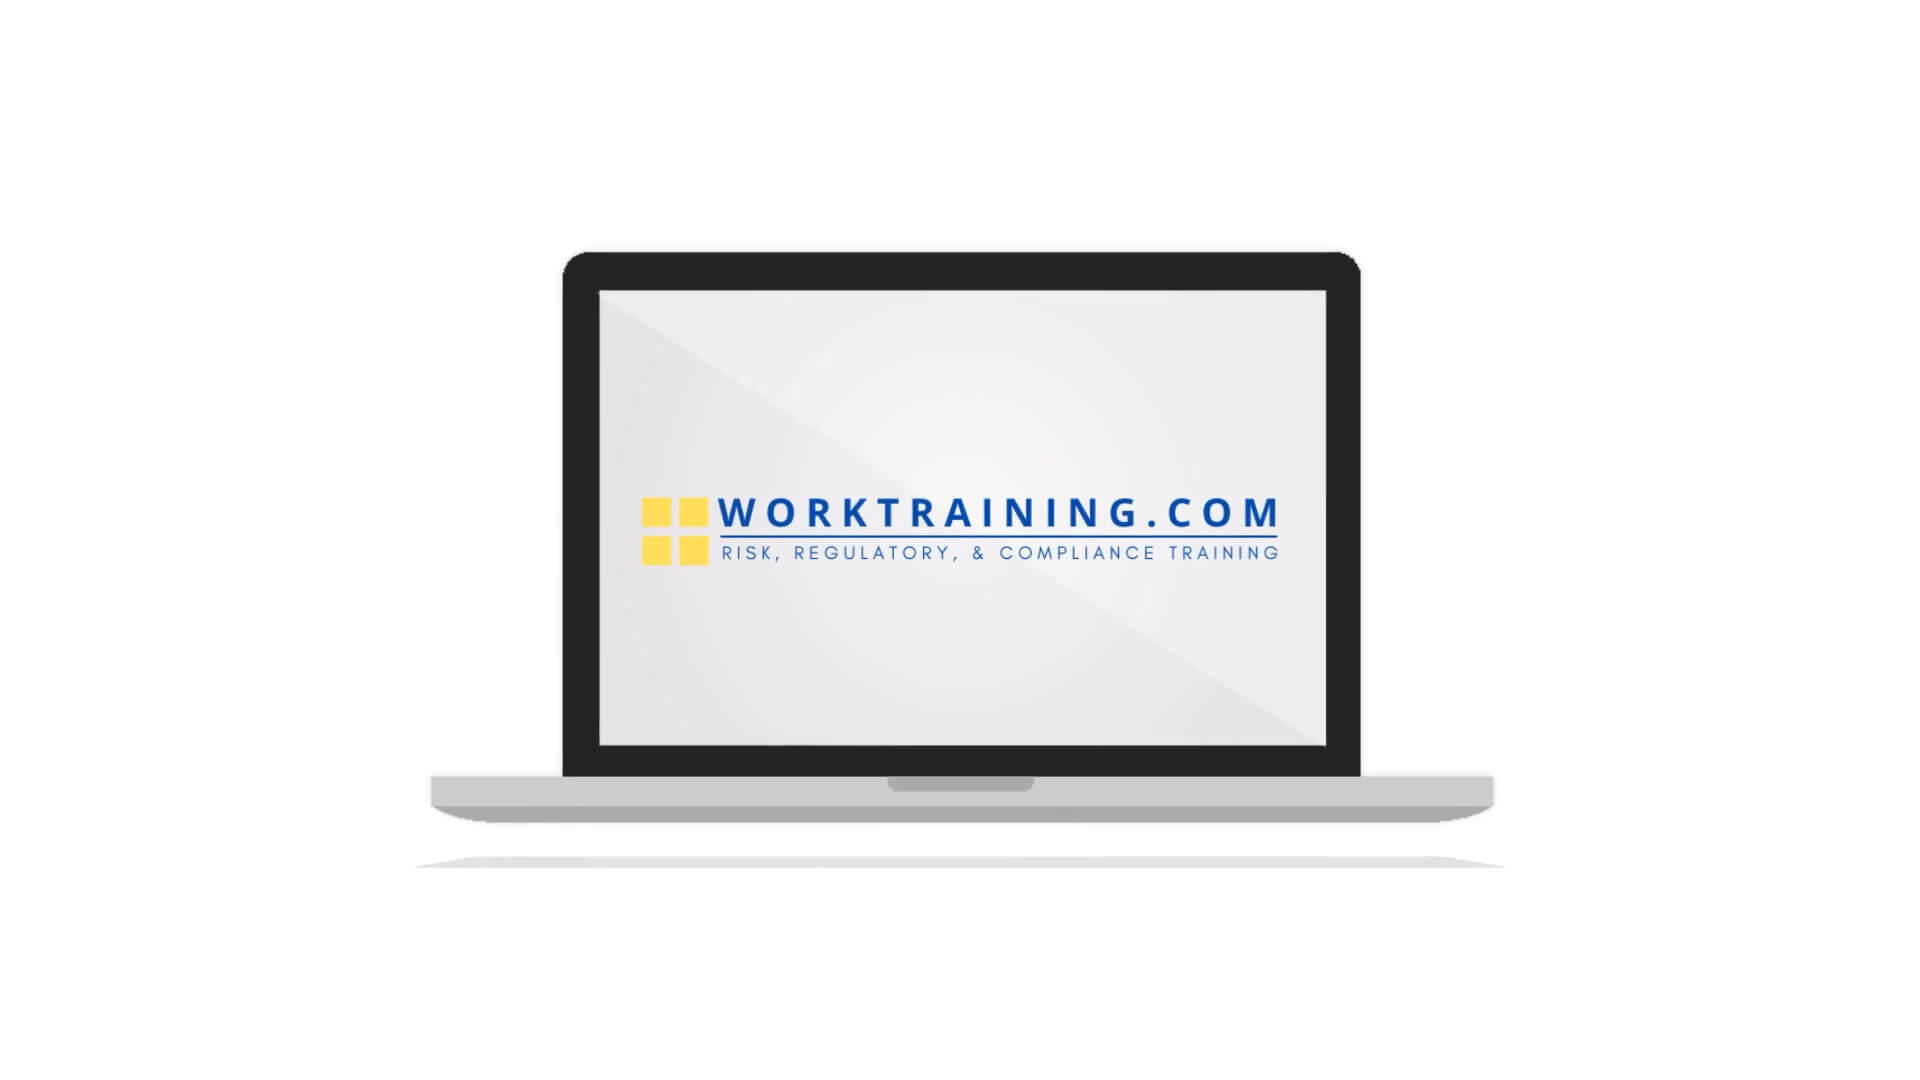 Online training tailored to your company's needs.